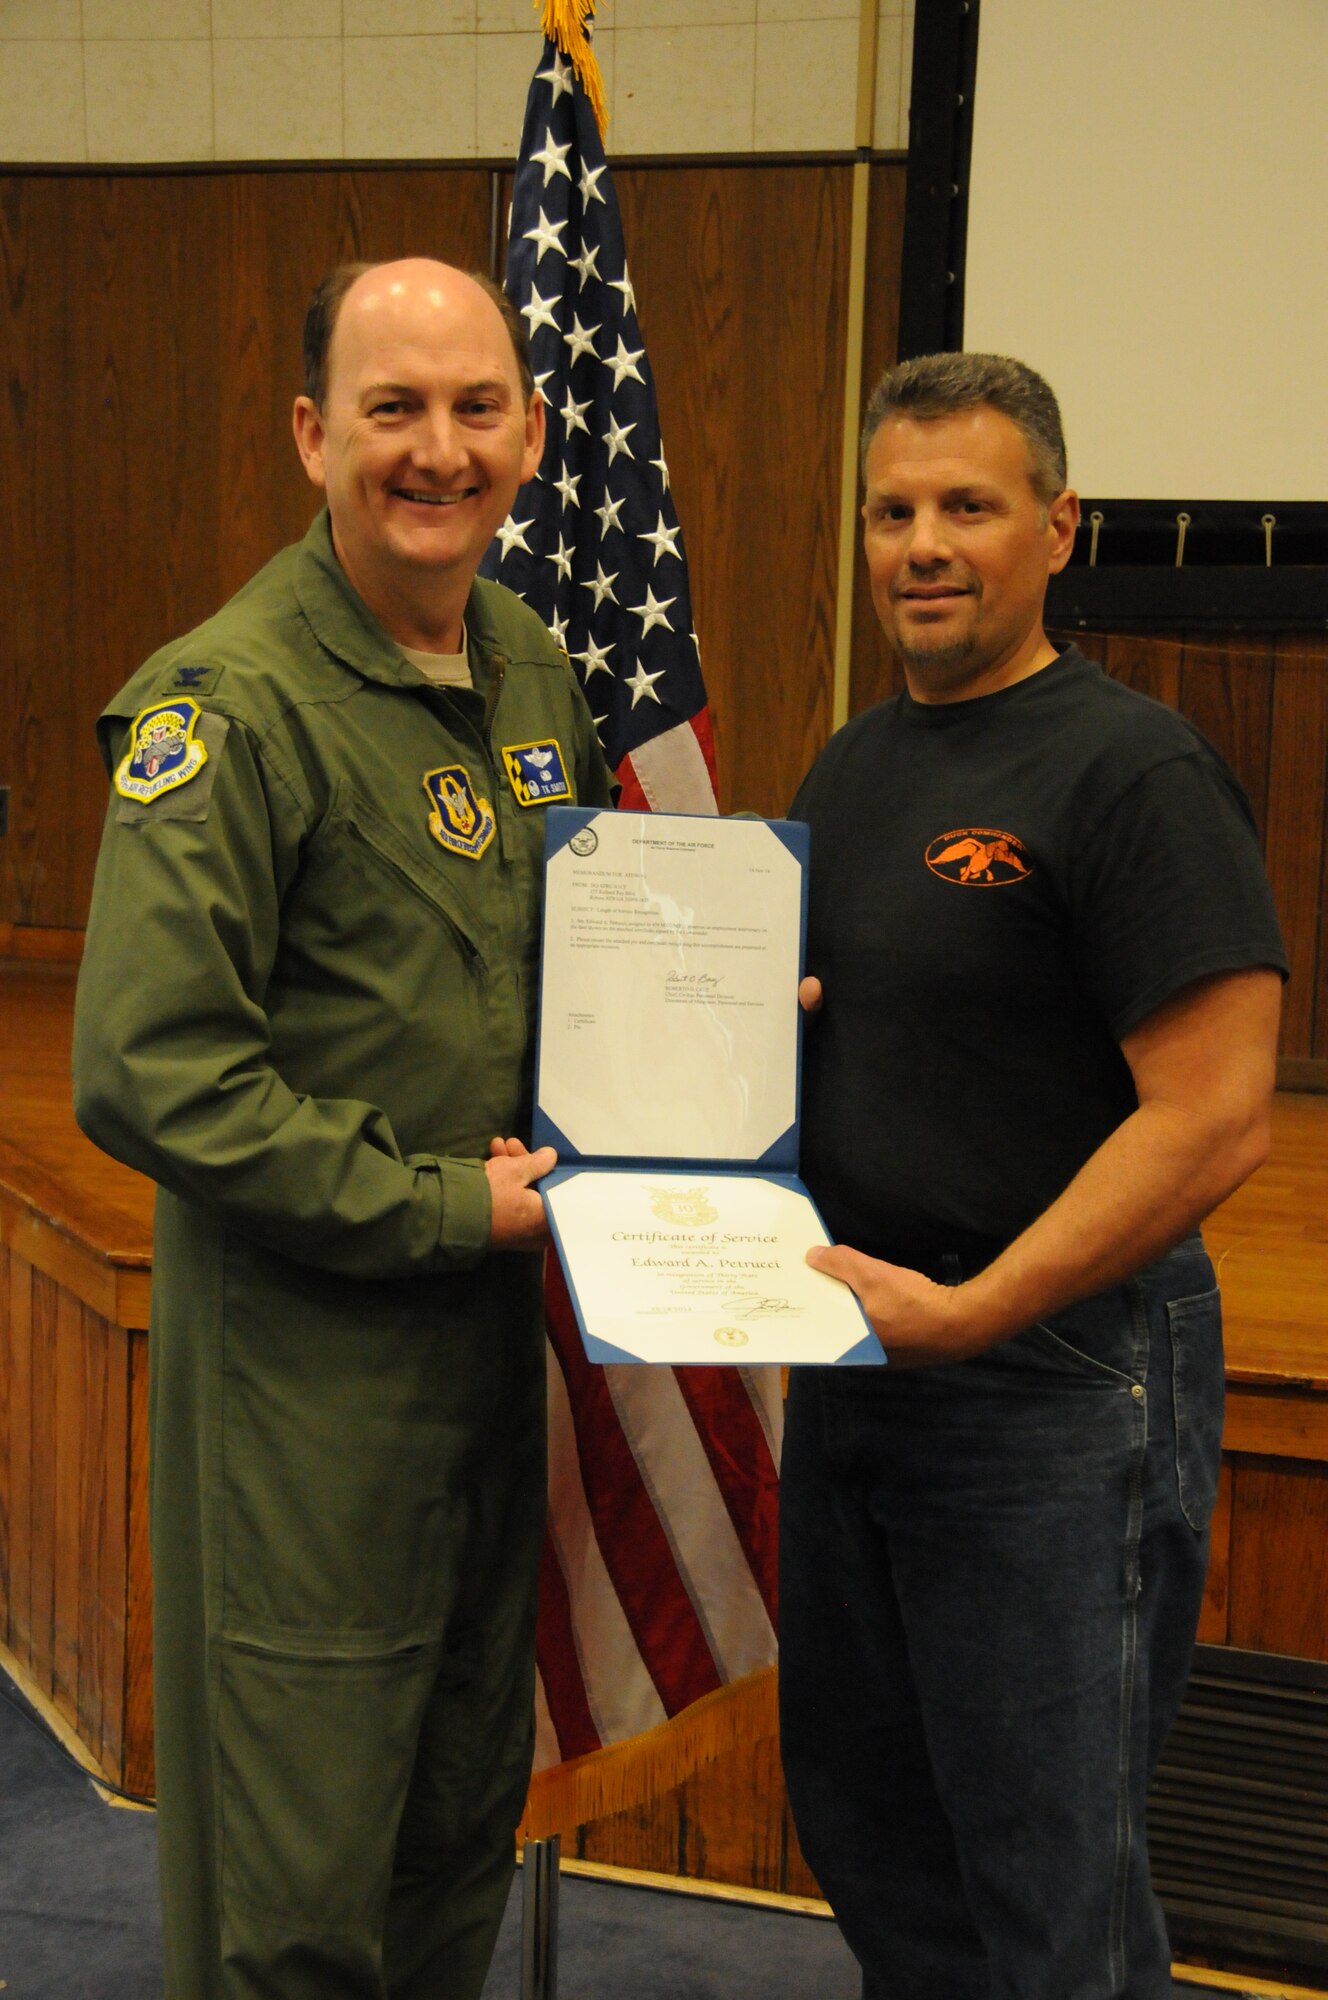 Mr. Edward Petrucci is awarded a certificate to honor his more than 30 years of service as a civilian.